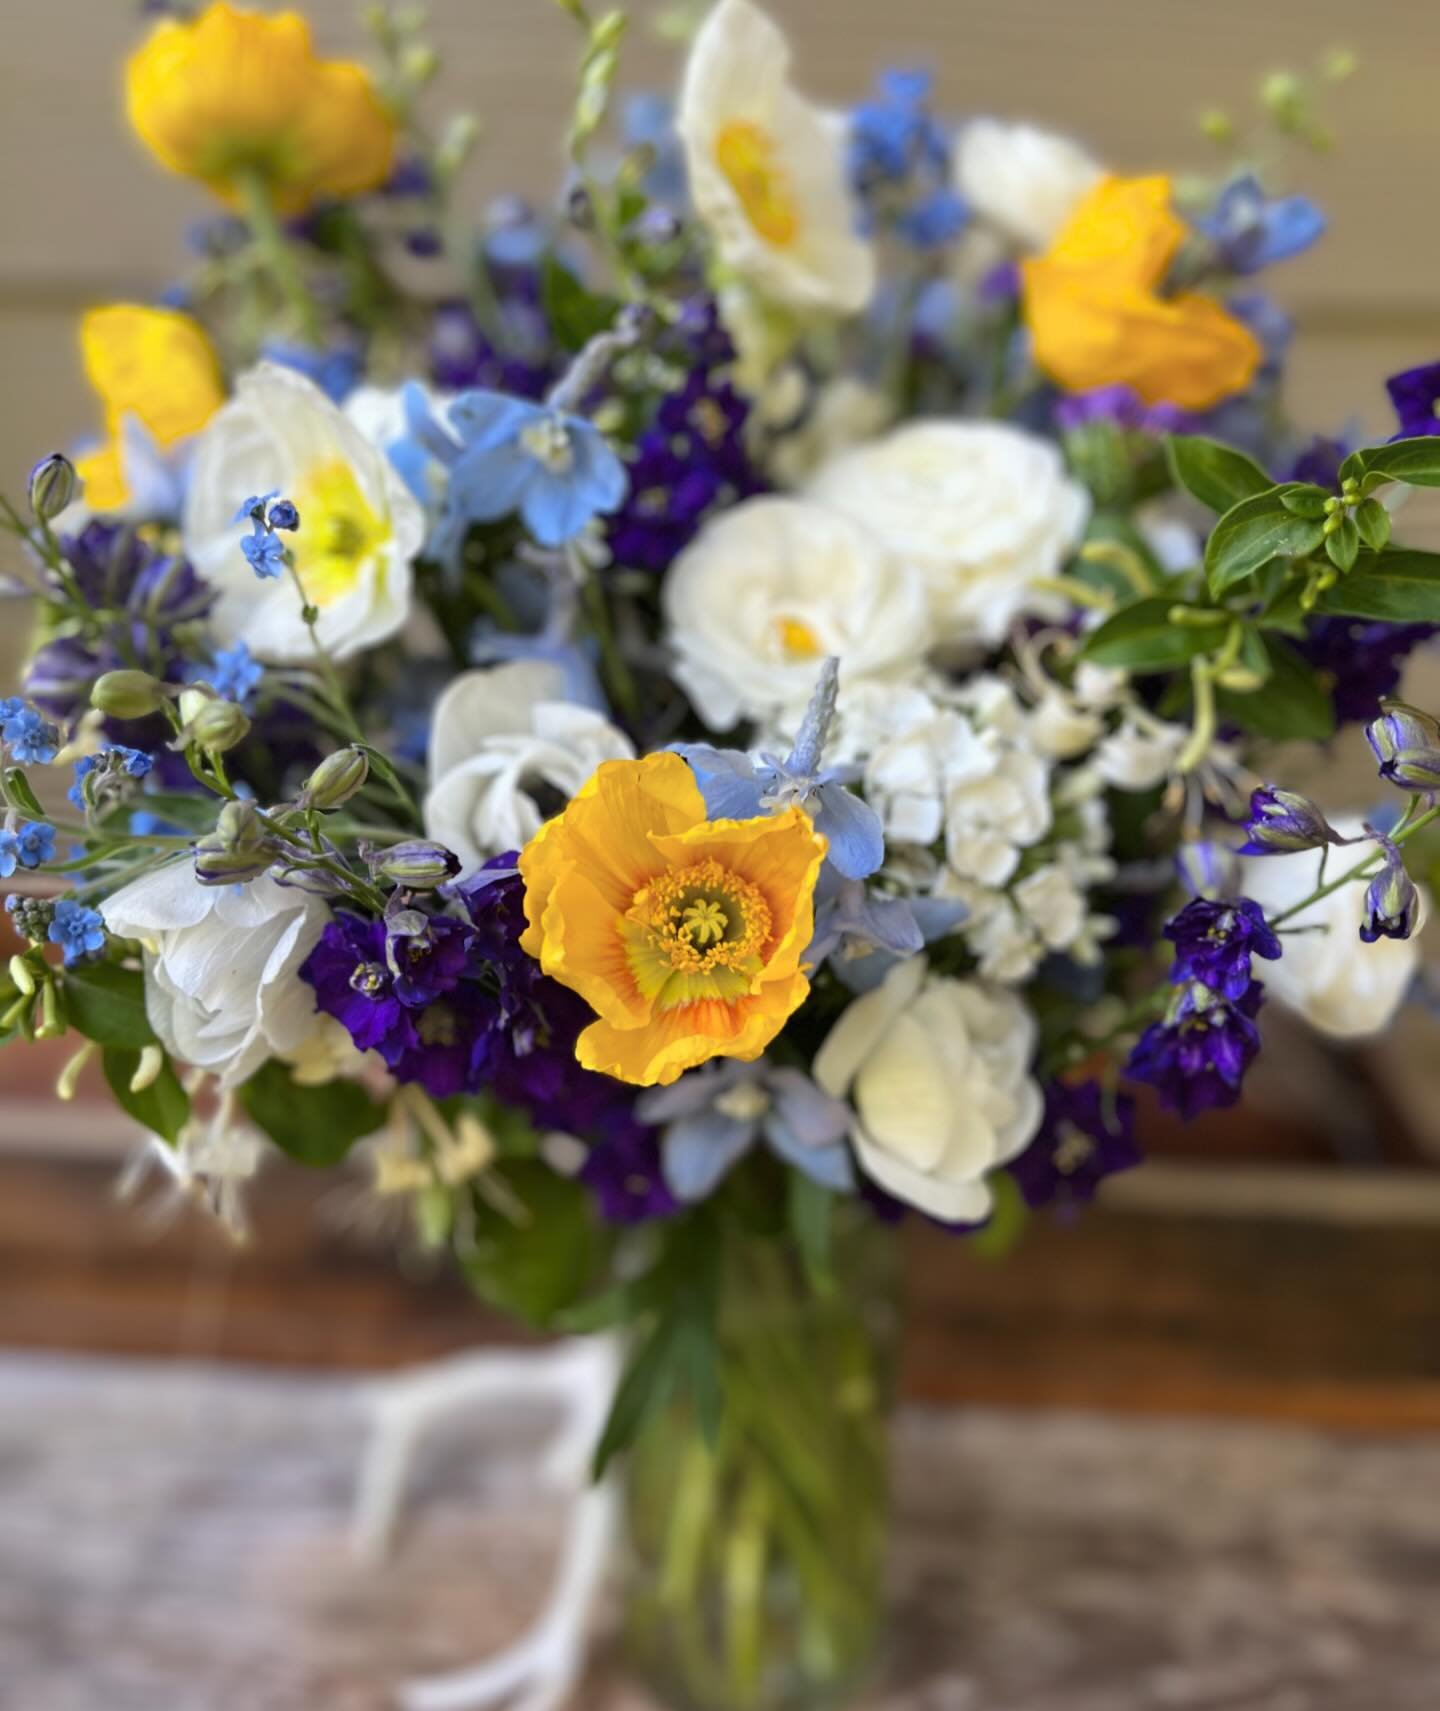 When #Ravenclaw needs party flowers. 💛 Don&rsquo;t those light blue delphinium flowers look like tiny sorting hats?? 🧙

Do you know which Hogwarts house you would have been in? 

I might have been Ravenclaw. This may be a new favorite color combina